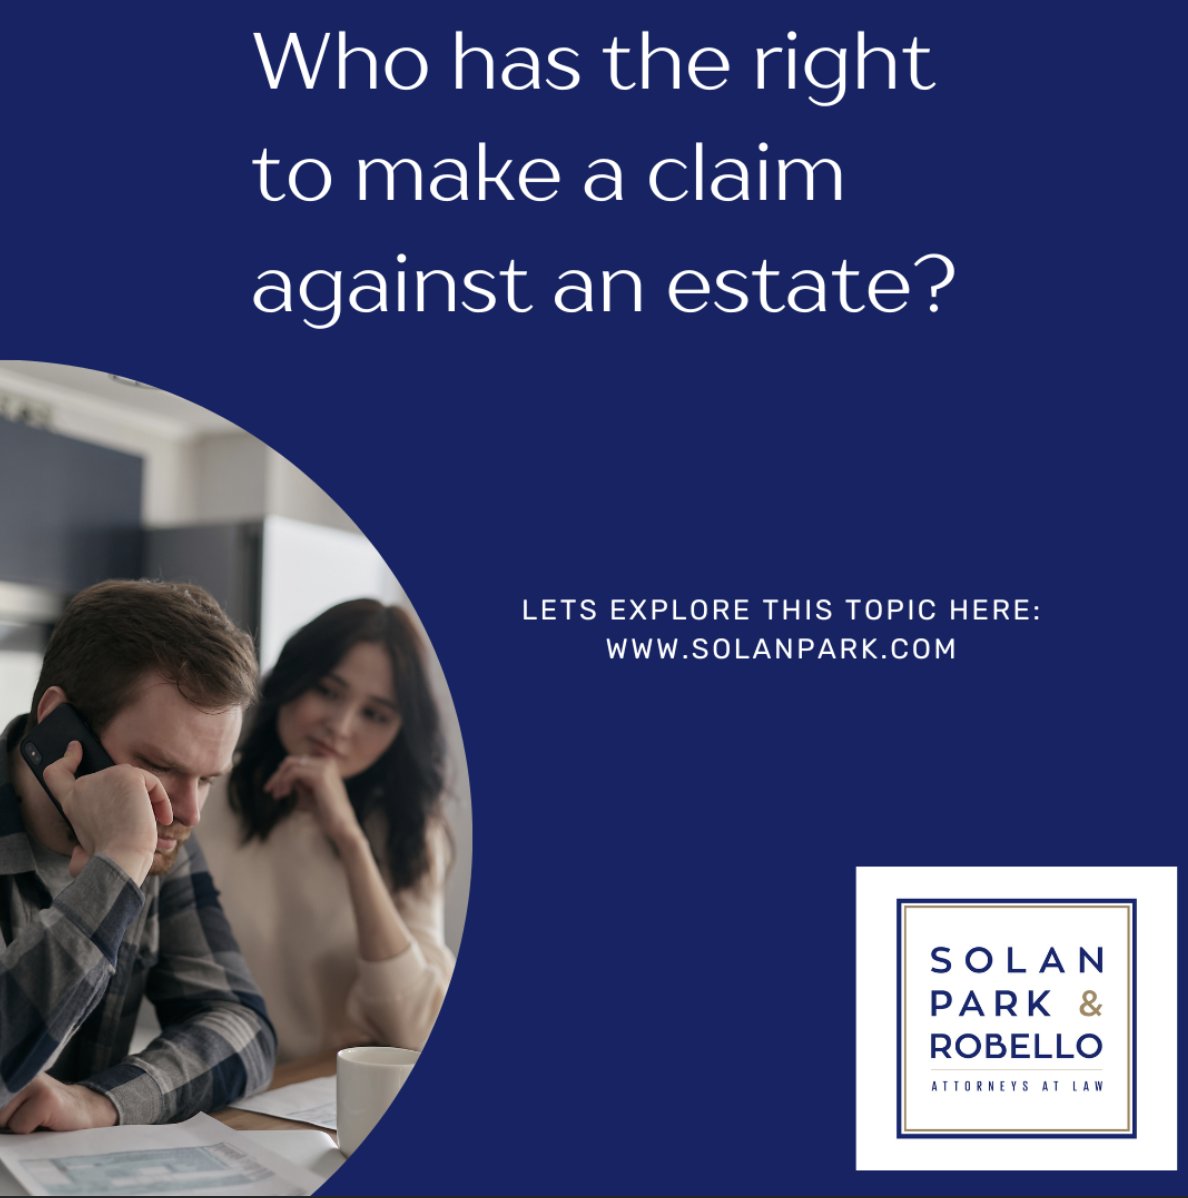 The details of an estate plan can be contested – but not by just anyone. Here’s who actually has a right to make a claim against an estate. 

solanpark.com/blog/who-has-t… 

#lawfirm #estateplanning #trustadministration